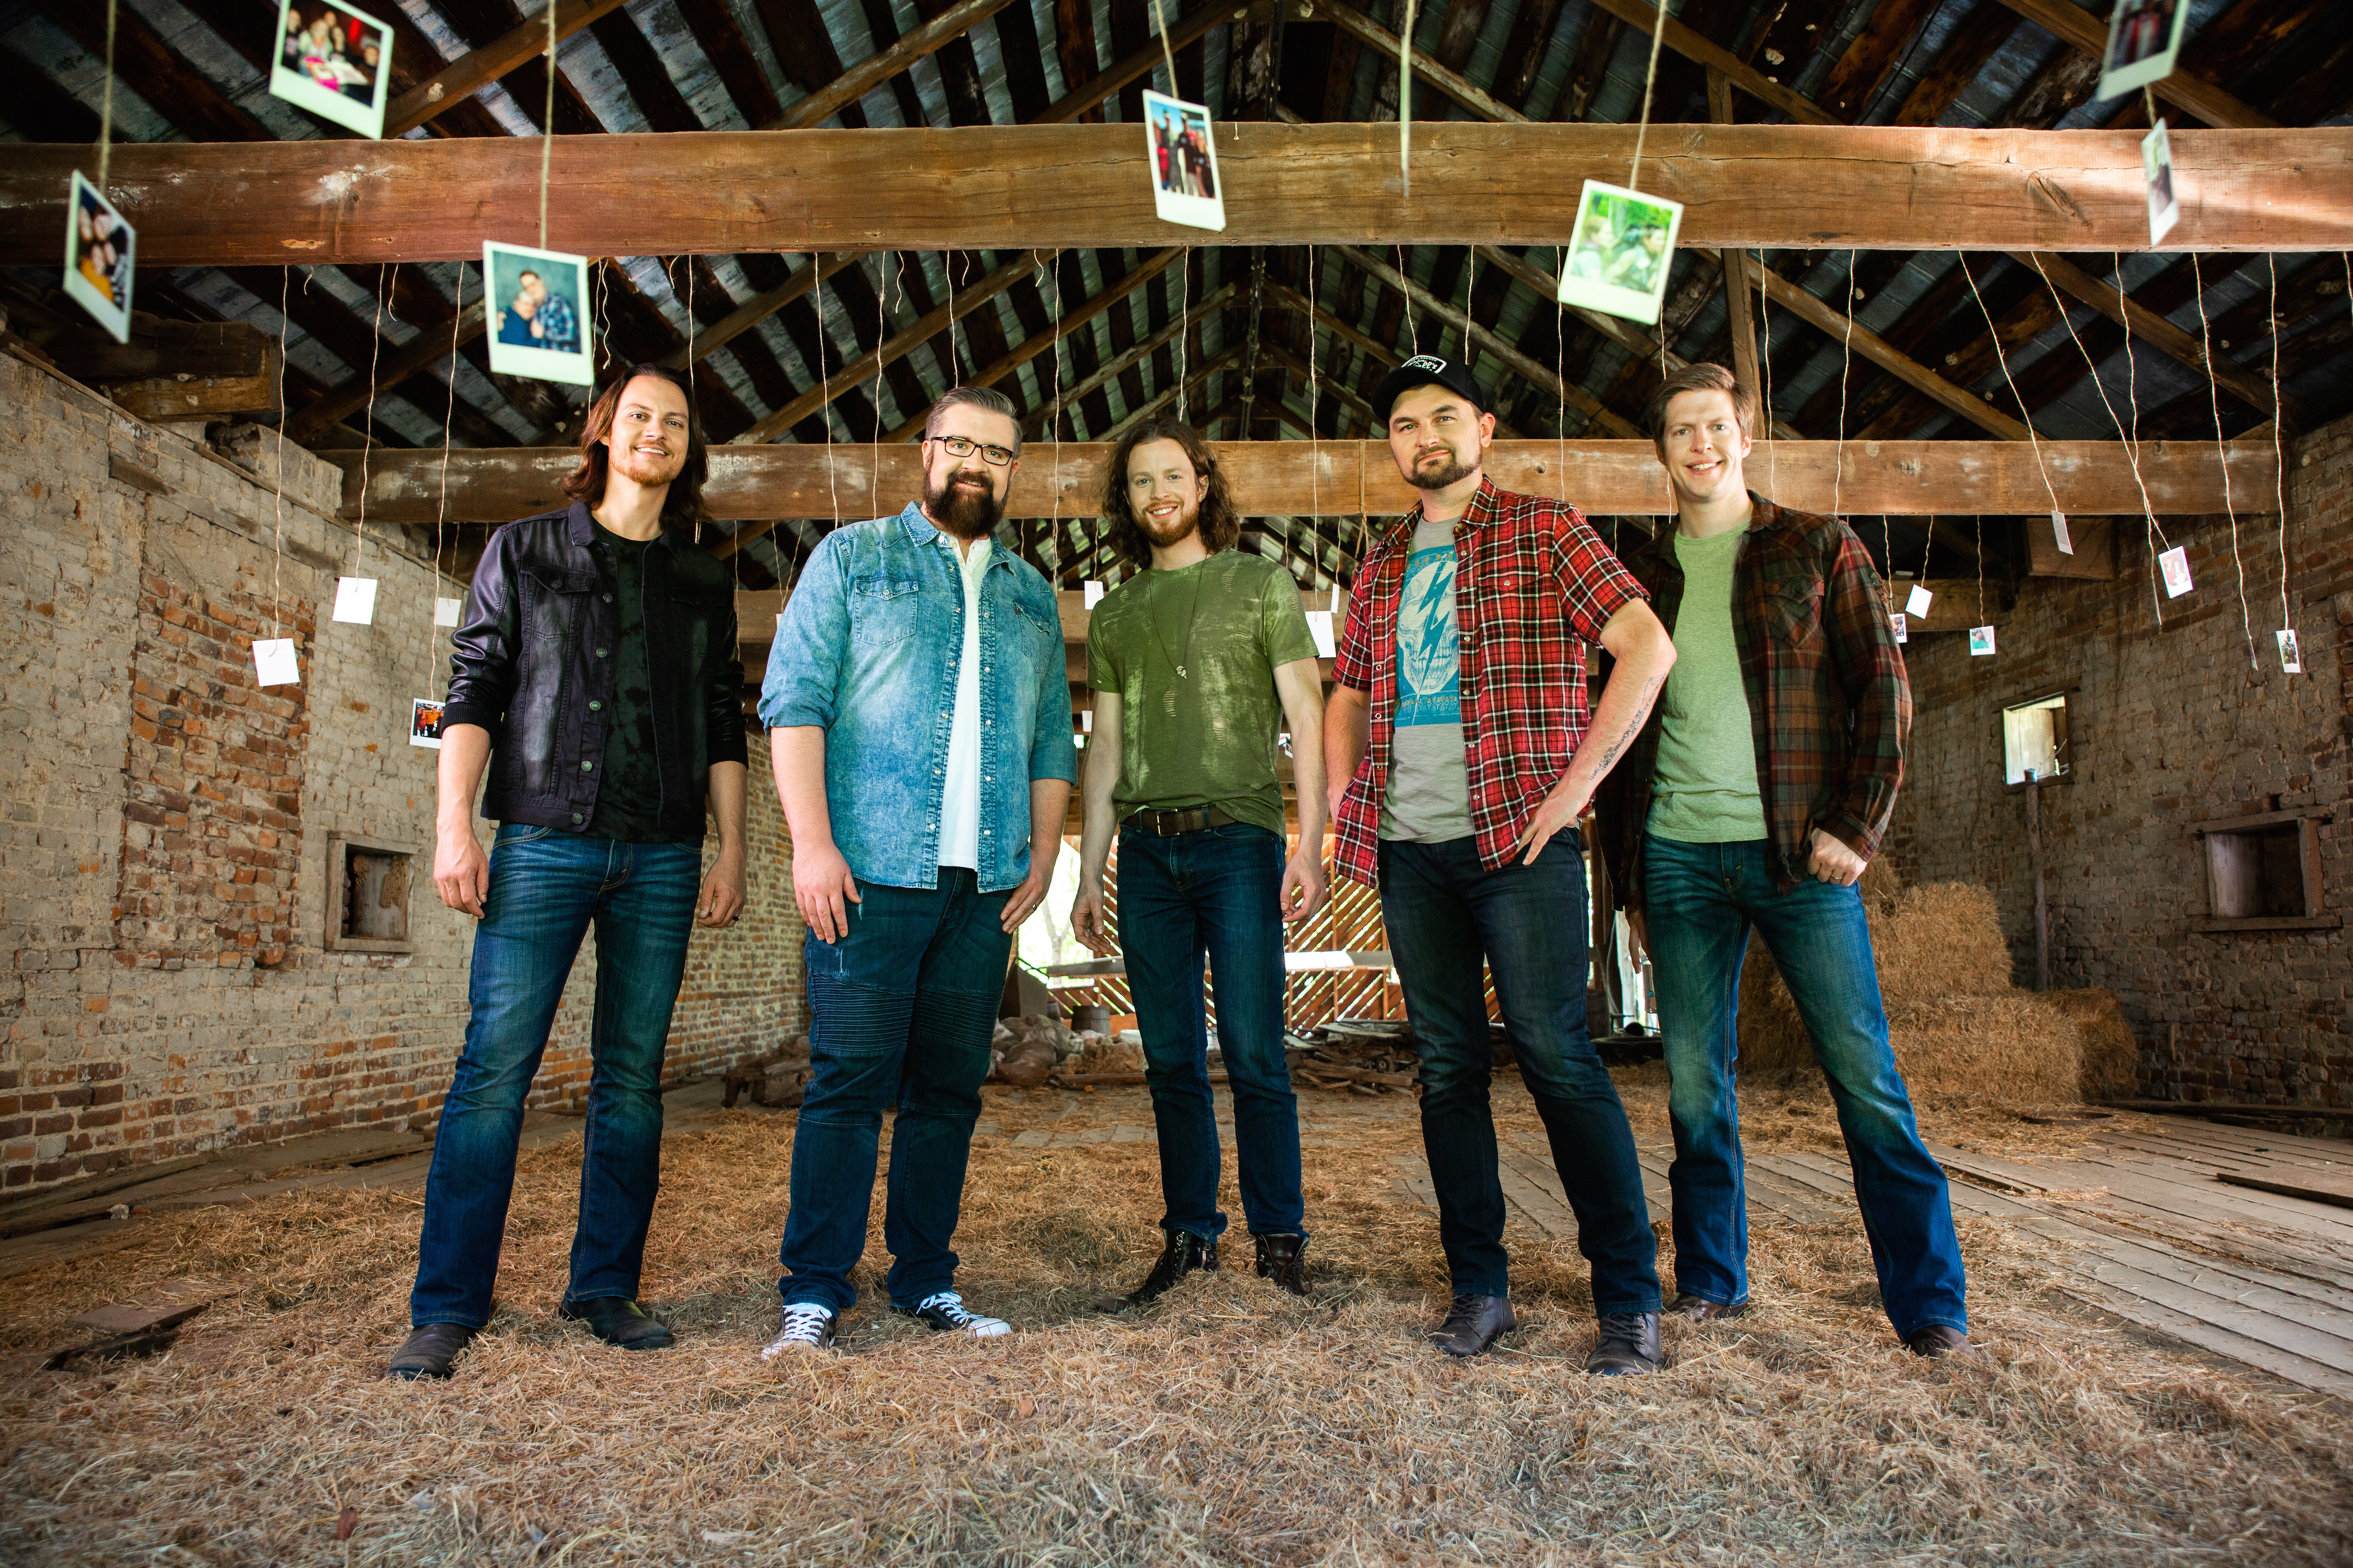 Home Free is ready to “Cross That Bridge” for love in new video